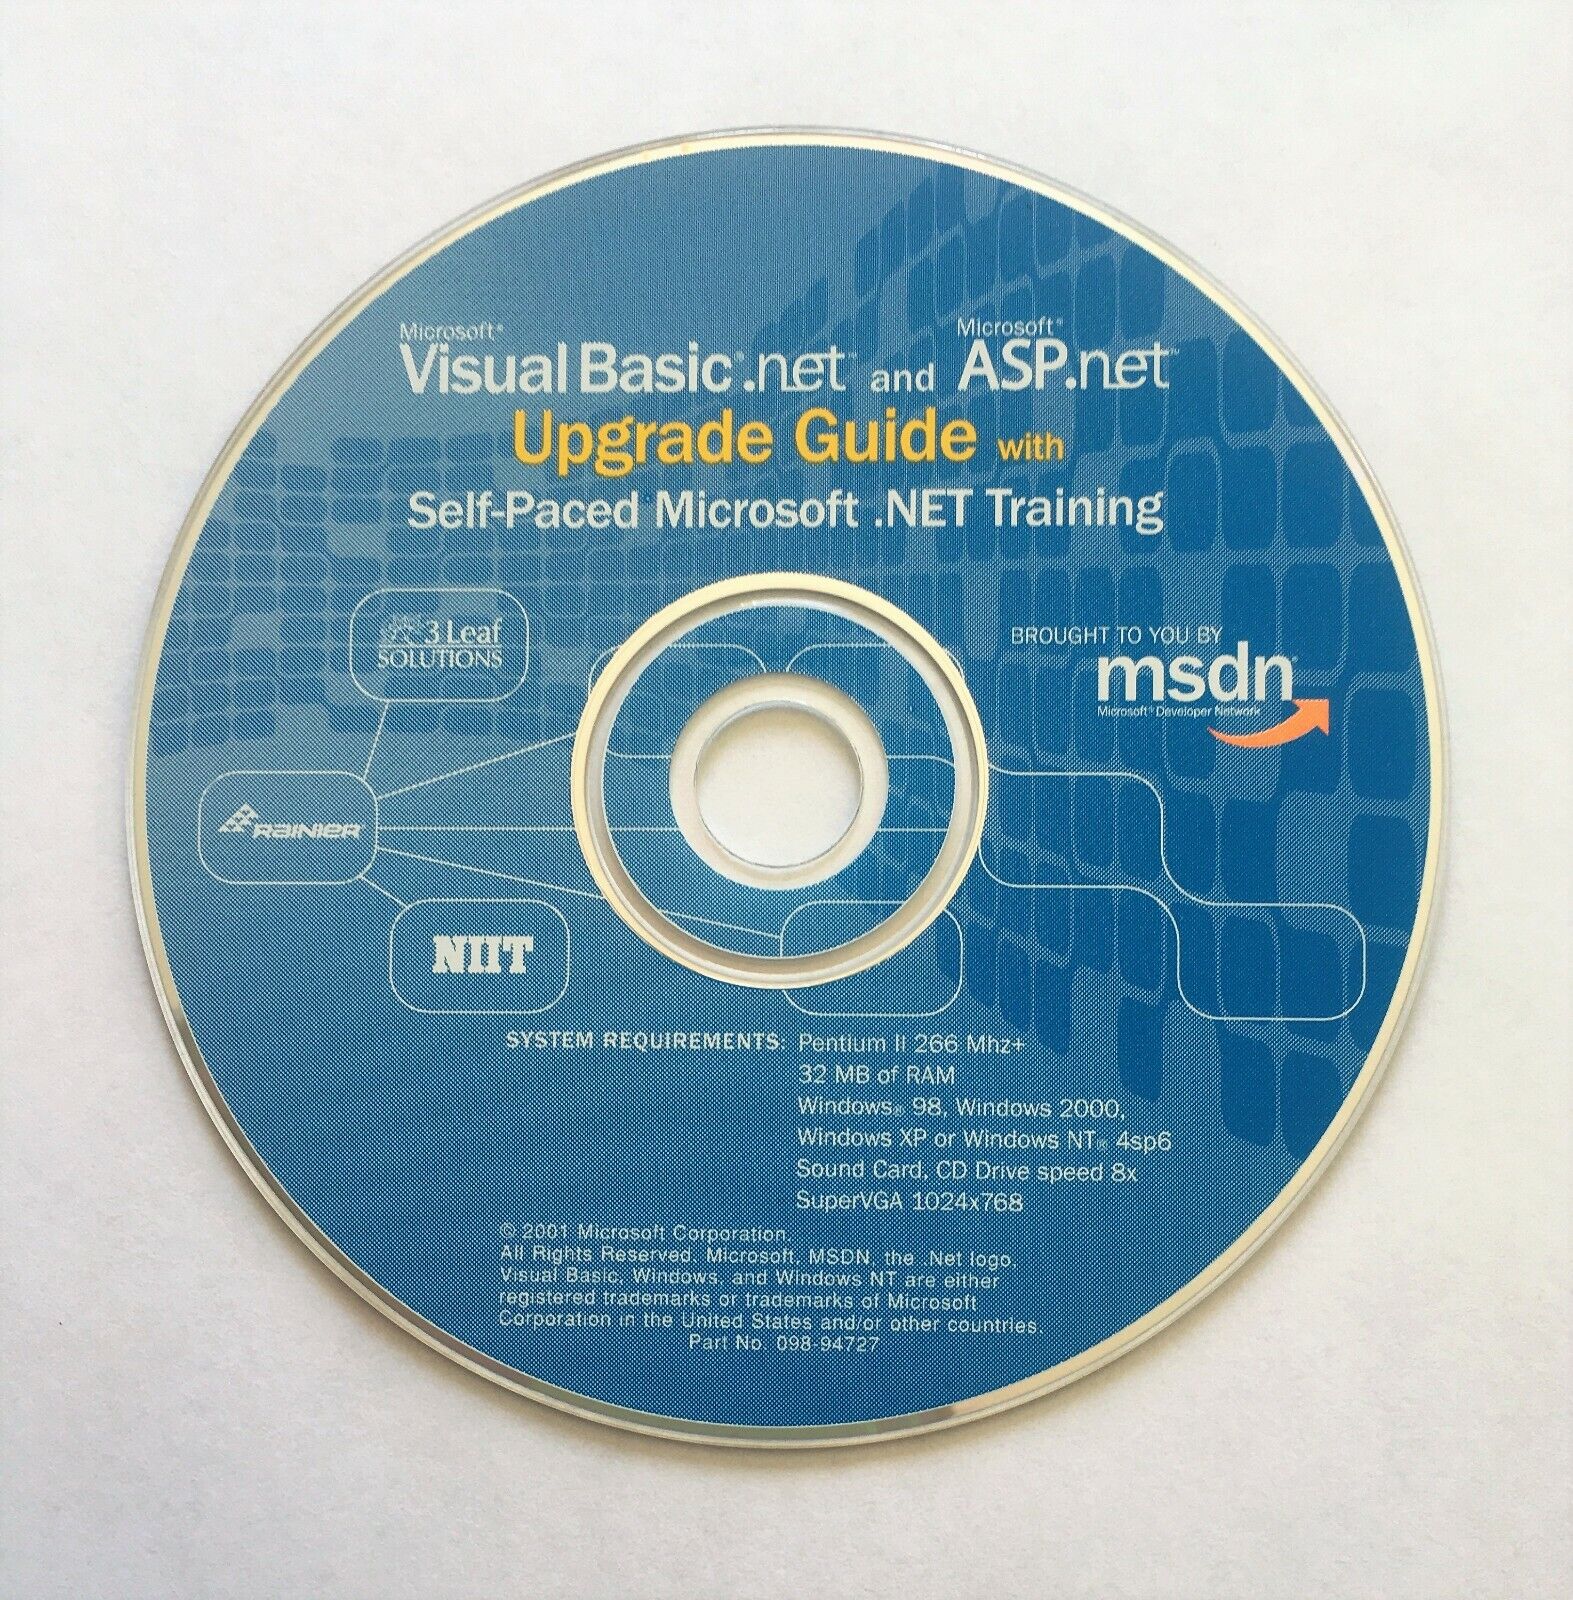 Microsoft Visual Basic.net and ASP .net Upgrade Guide, Training by MSDN 2001 CD